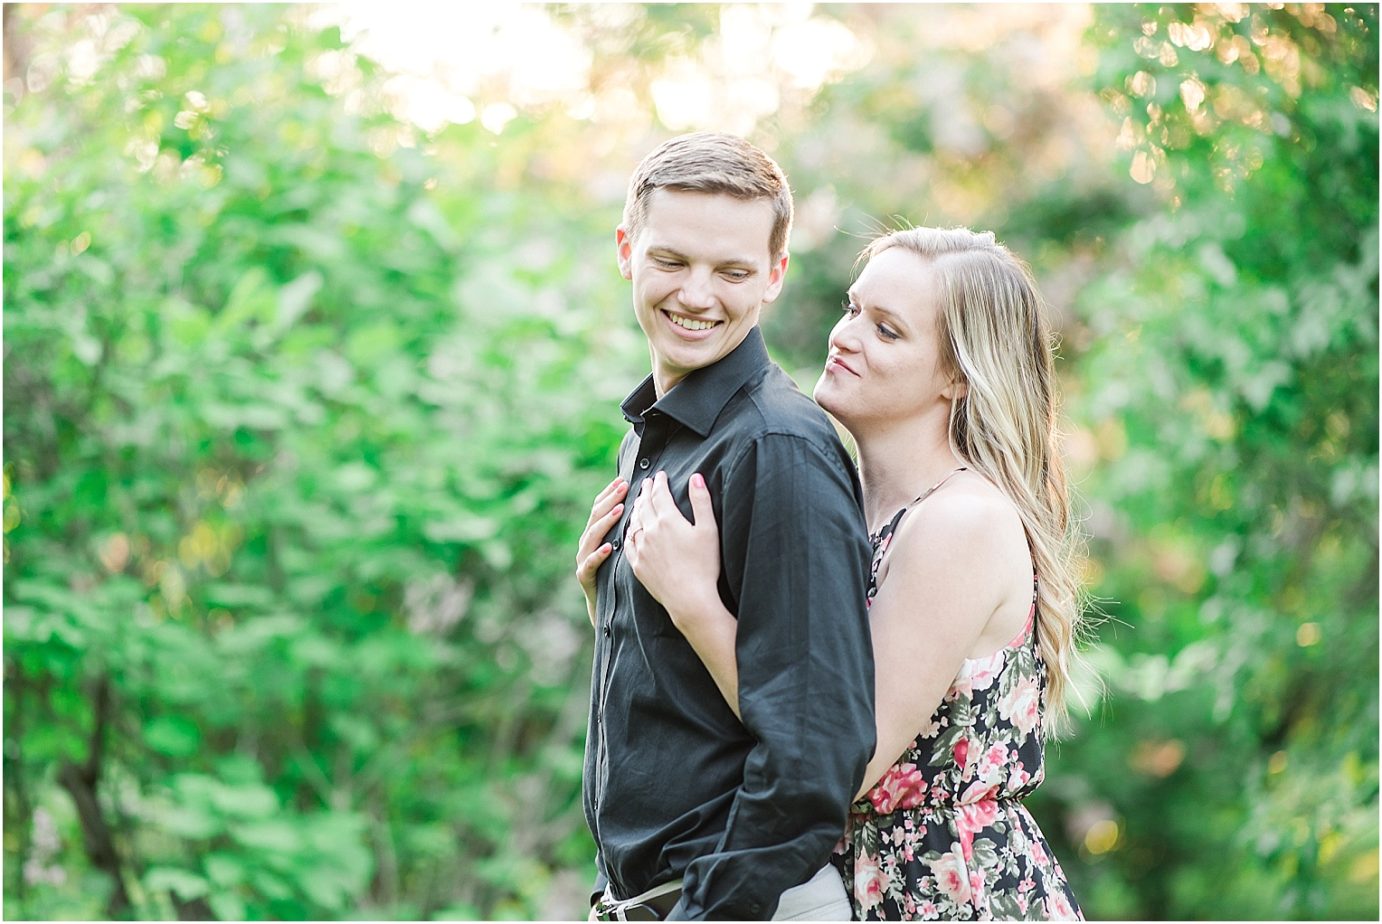 Manito Park Engagement Session Spokane Photographer Bryan and Olivia snuggling in grove of lilacs